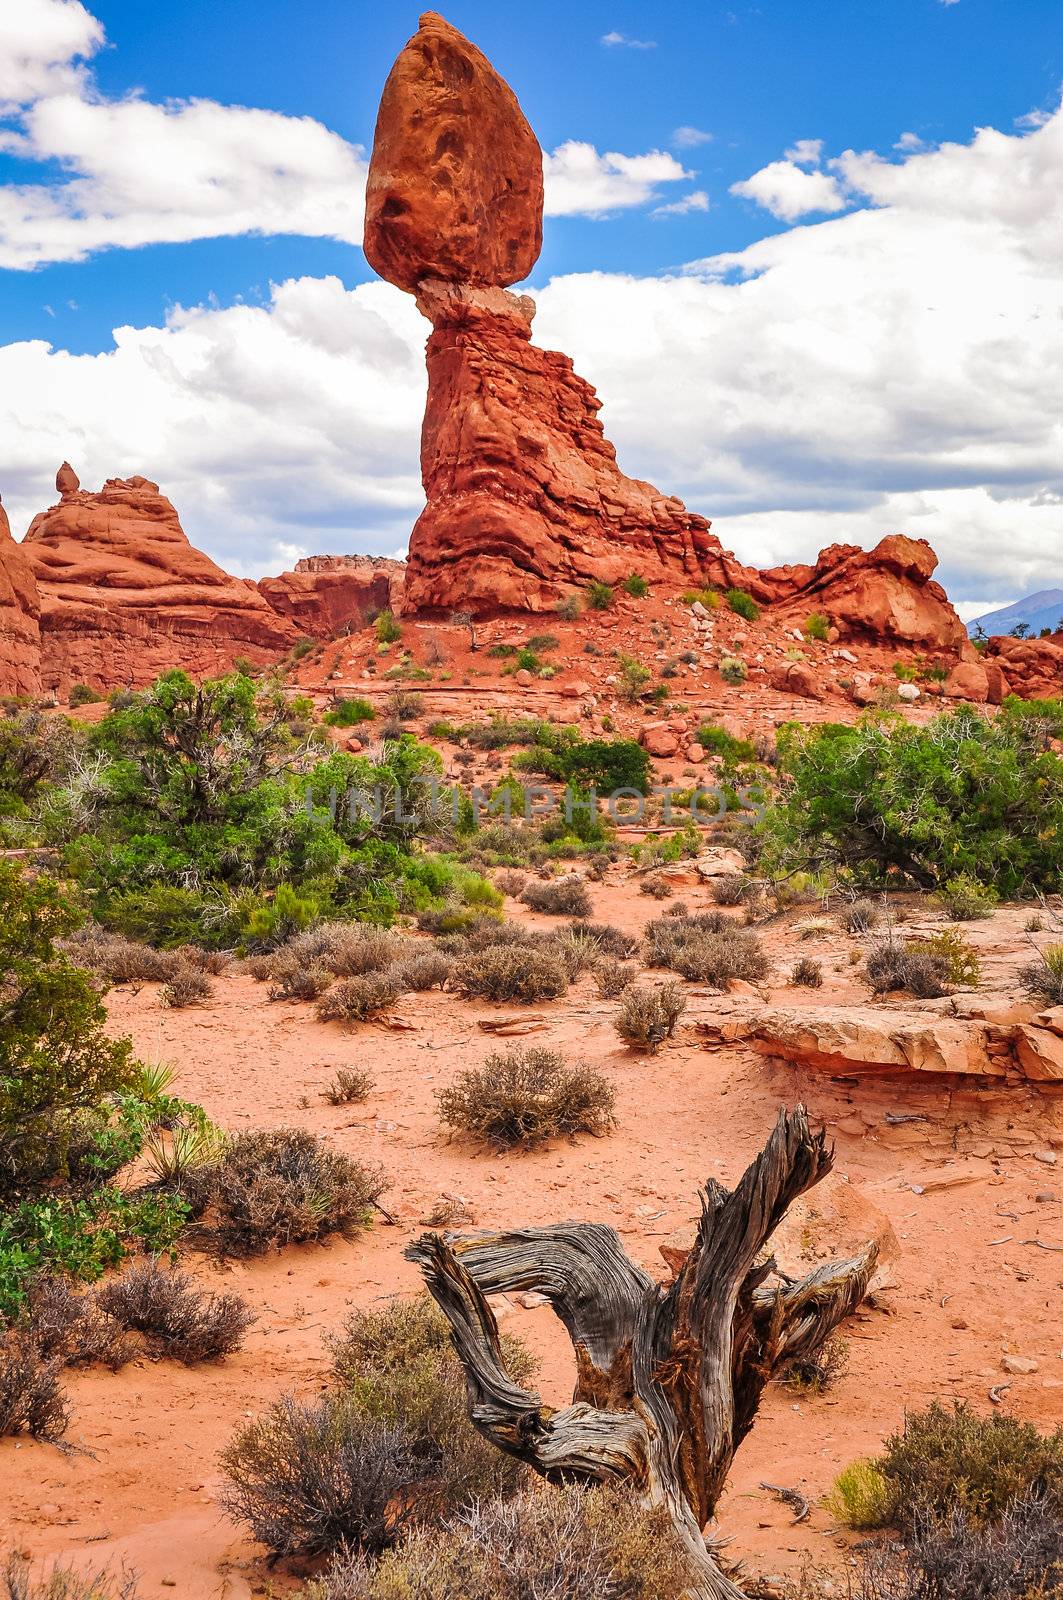 Balanced rock in Arches National Park, Utah by martinm303